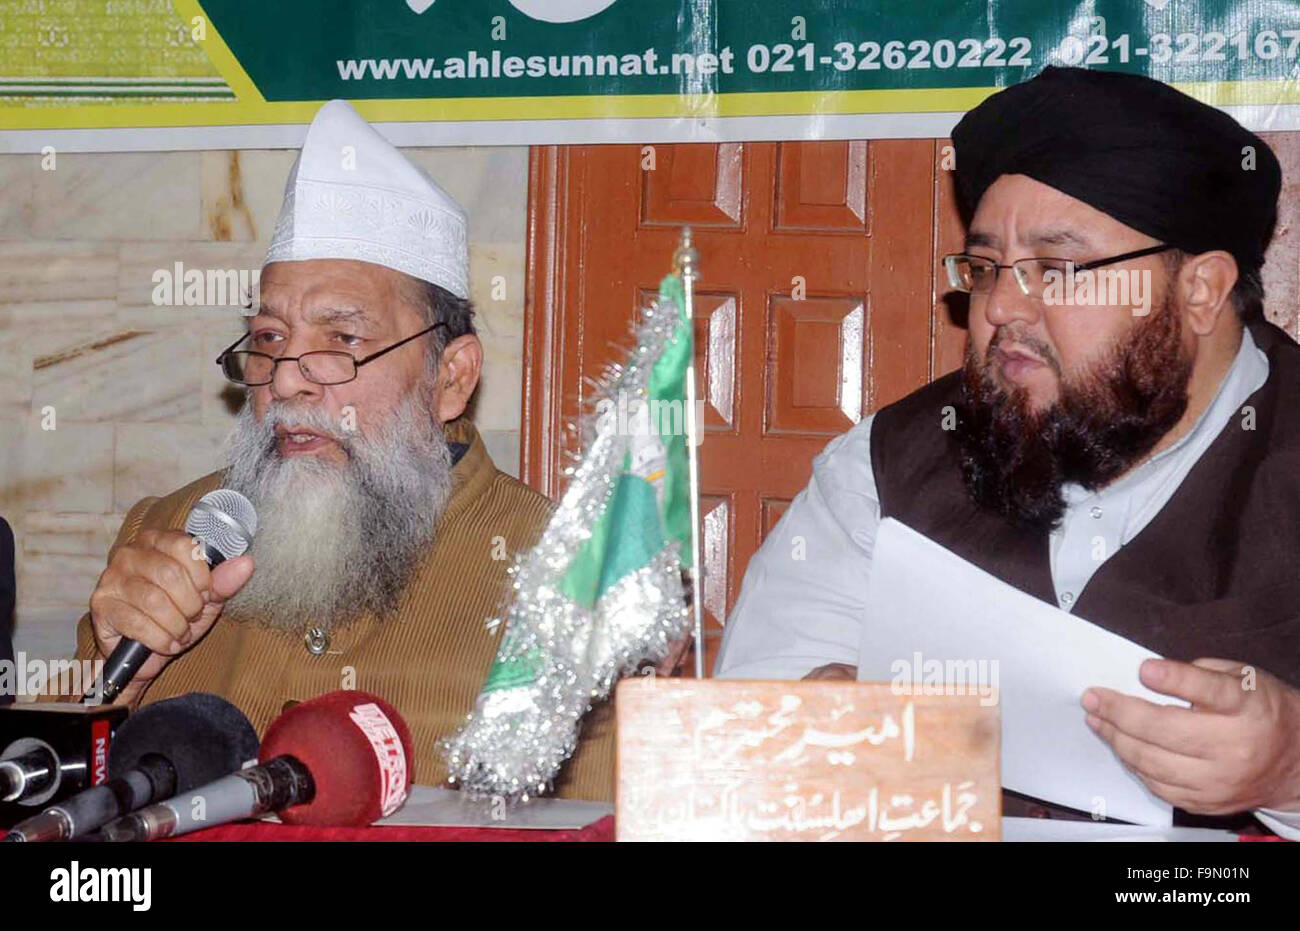 Leader of Jamat-e-Ahle Sunnat, Shah Turab-ul-Haq Qadri addressing to media persons concerning procession of 12th Rabi-ul-Awwal in connection of Holy Prophet Muhammad (PBUH) birthday anniversary, during a press conference held in Karachi on Thursday, December 17, 2015. Stock Photo